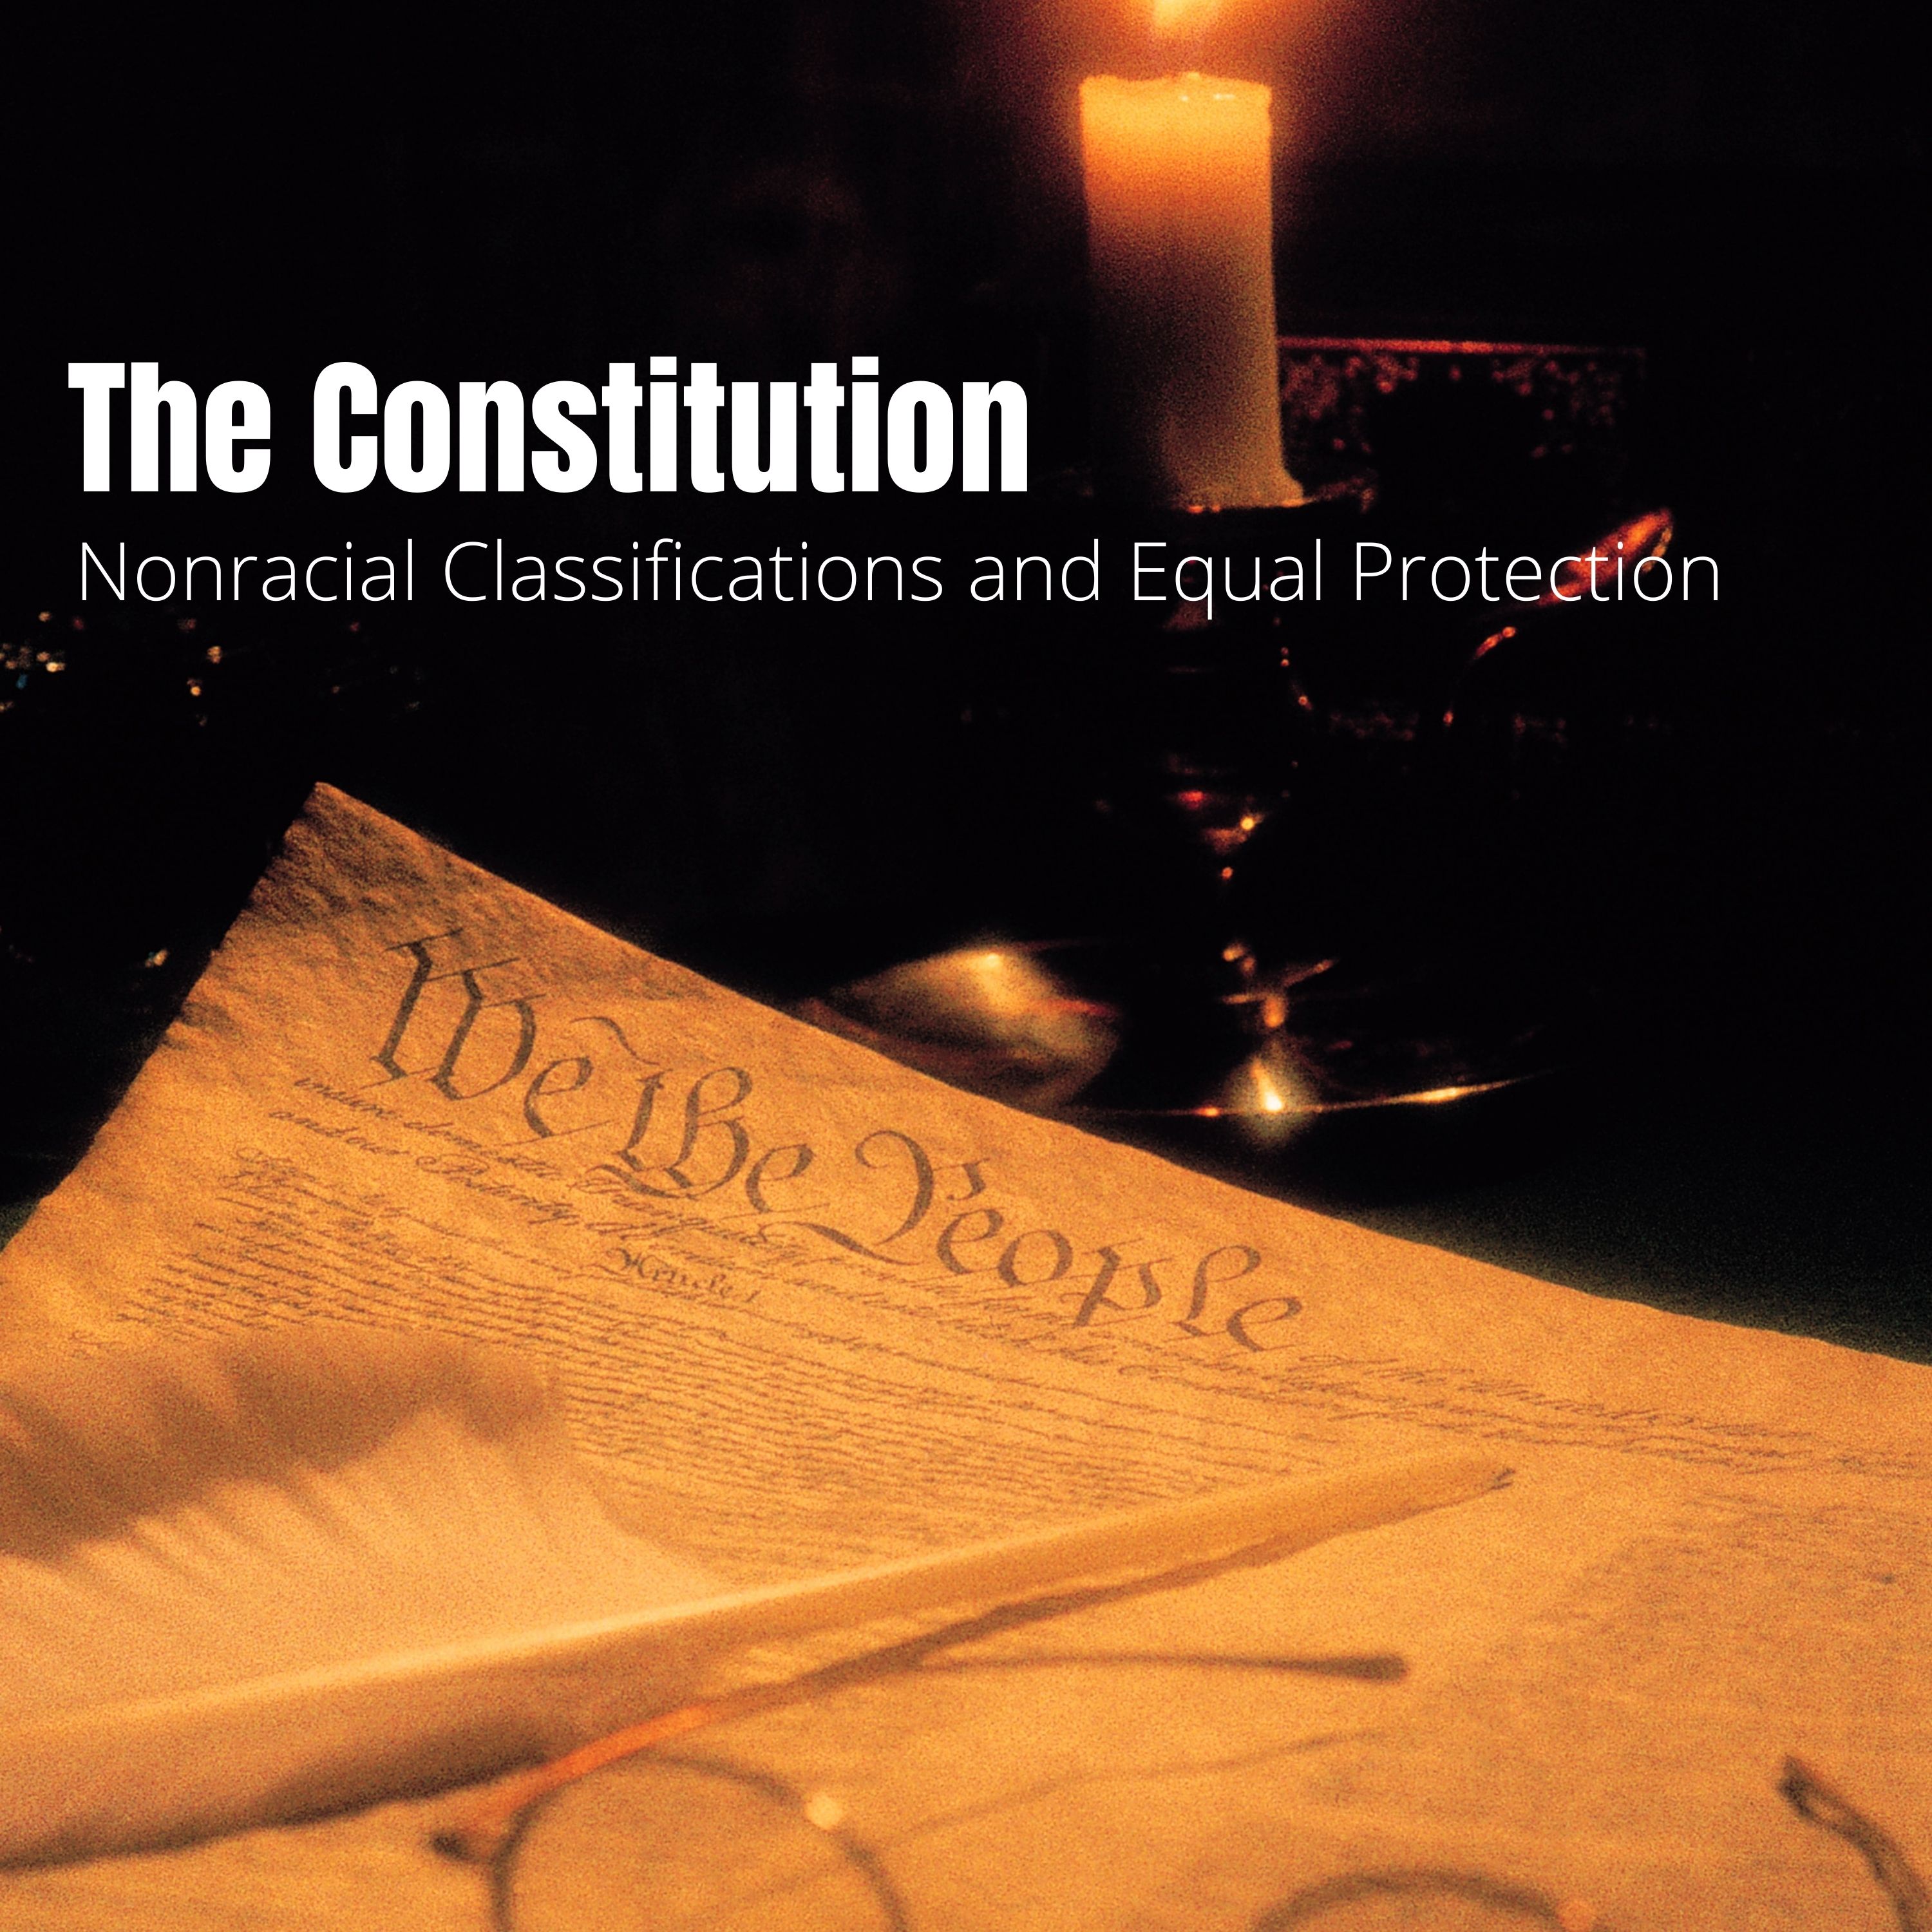 Constitutional Law - Lecture Five: Nonracial Classifications and Equal Protection